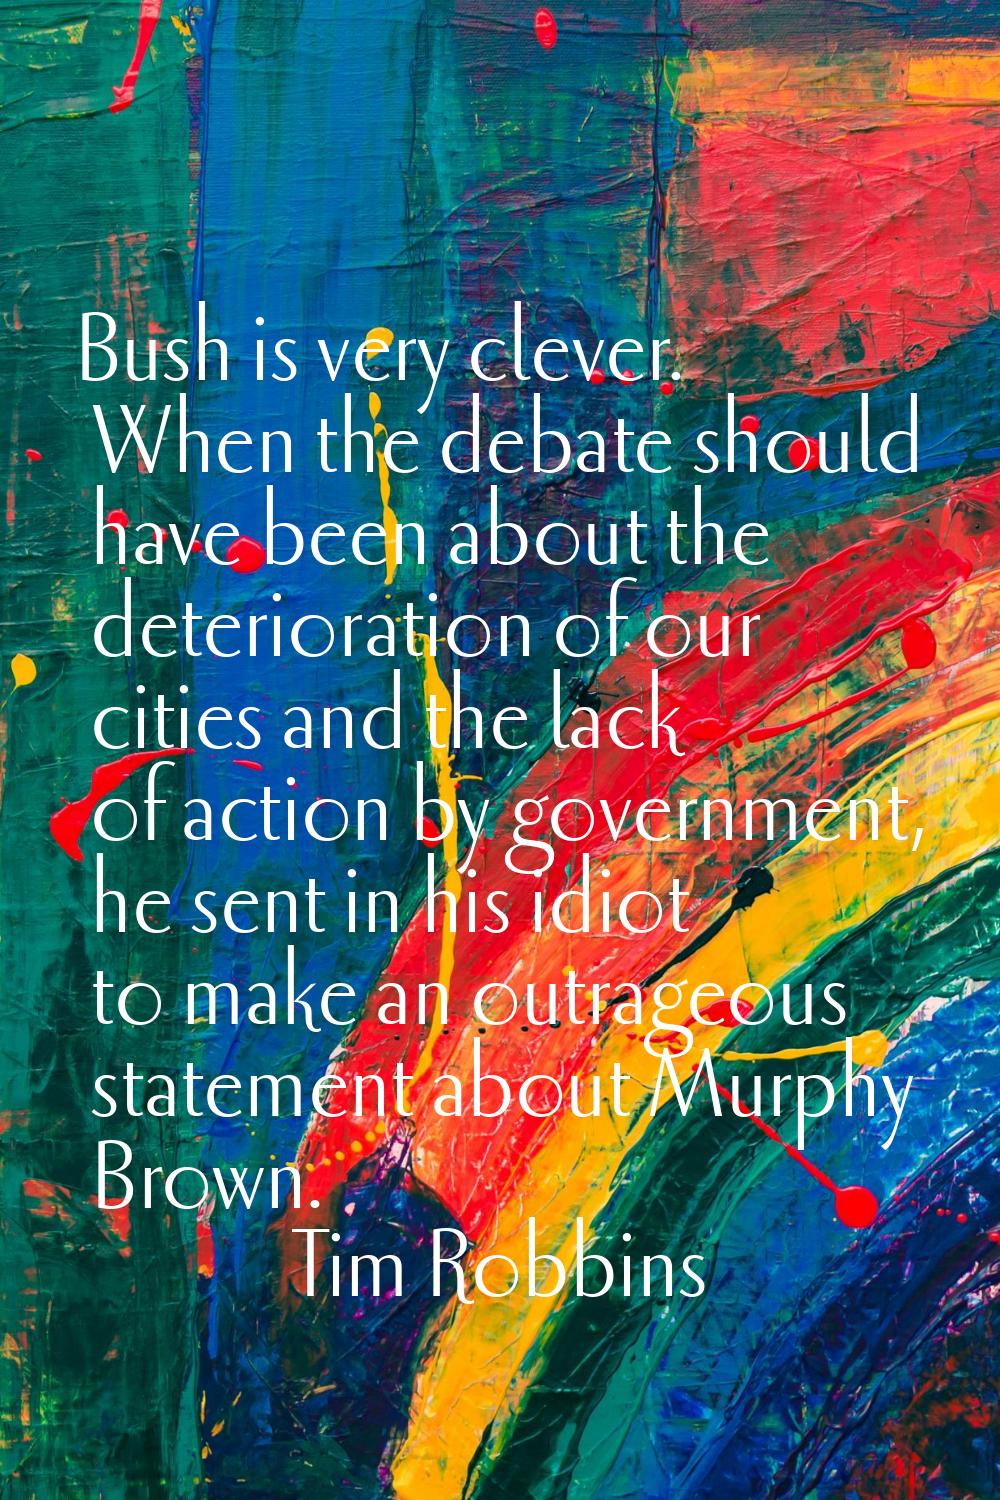 Bush is very clever. When the debate should have been about the deterioration of our cities and the